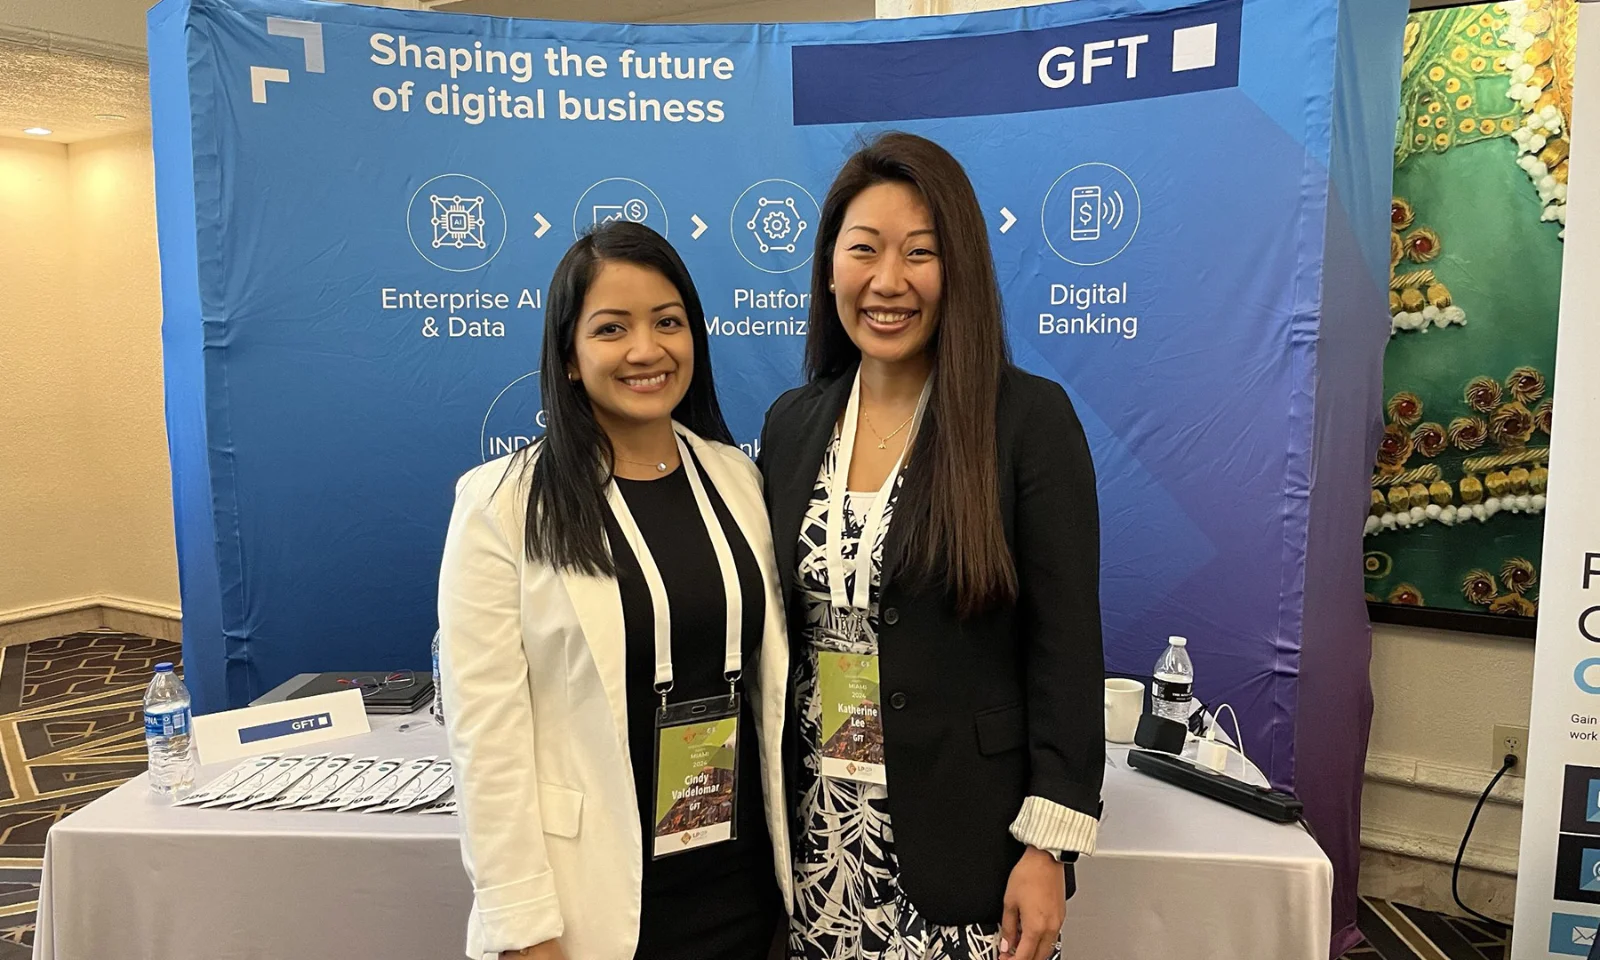 Meet the GFT team at the LPGP Connect 2024 event, where our representatives are dedicated to shaping the future of digital business. Discover GFT&#039;s innovative solutions in enterprise AI, platform modernization, and digital banking, as our experts engage with industry leaders to drive advancements and foster strong business relationships.